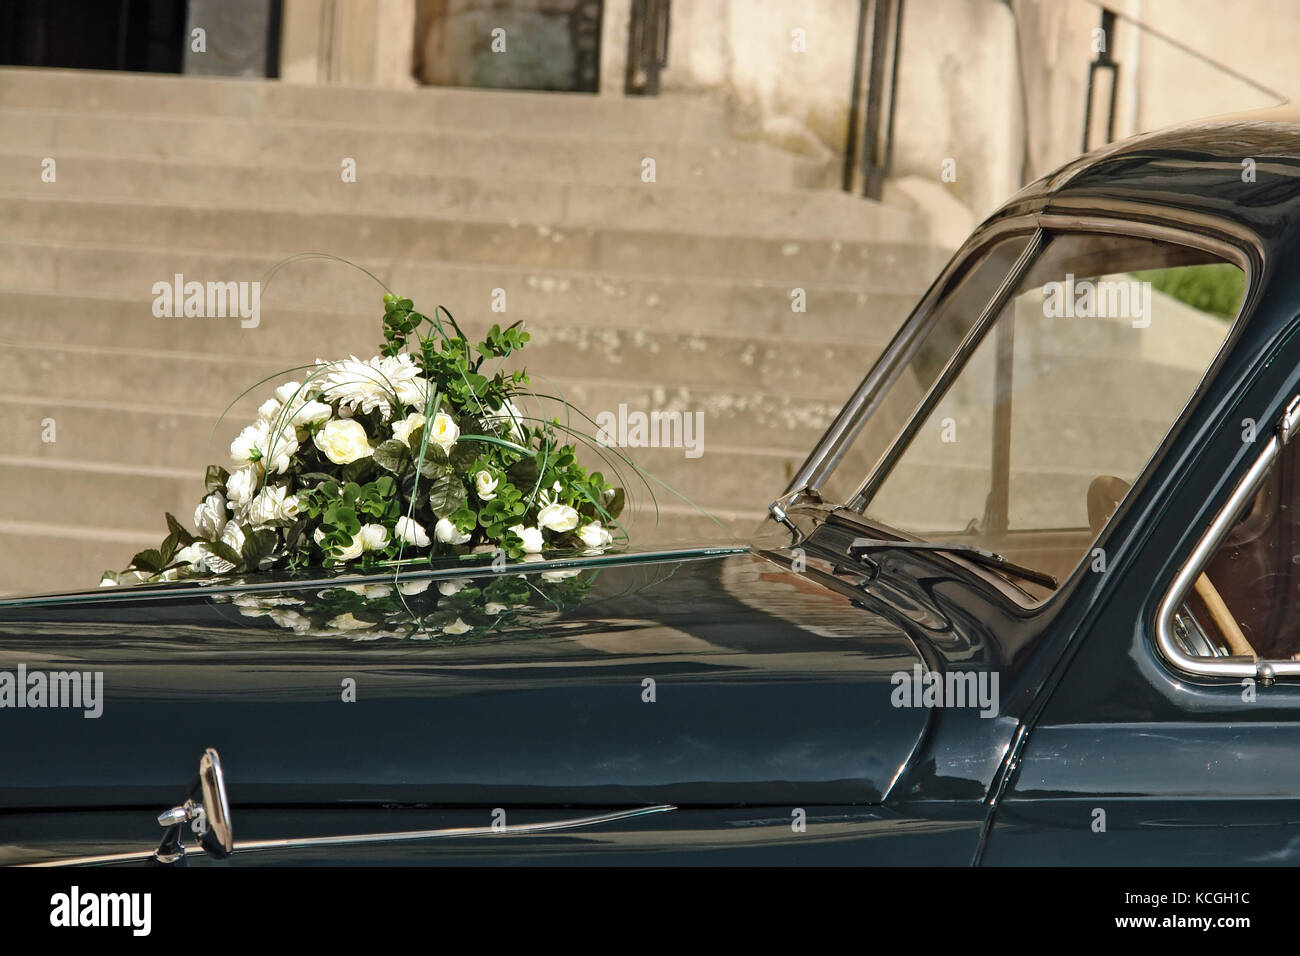 Wedding flowers on retro car parked in front of church building Stock Photo